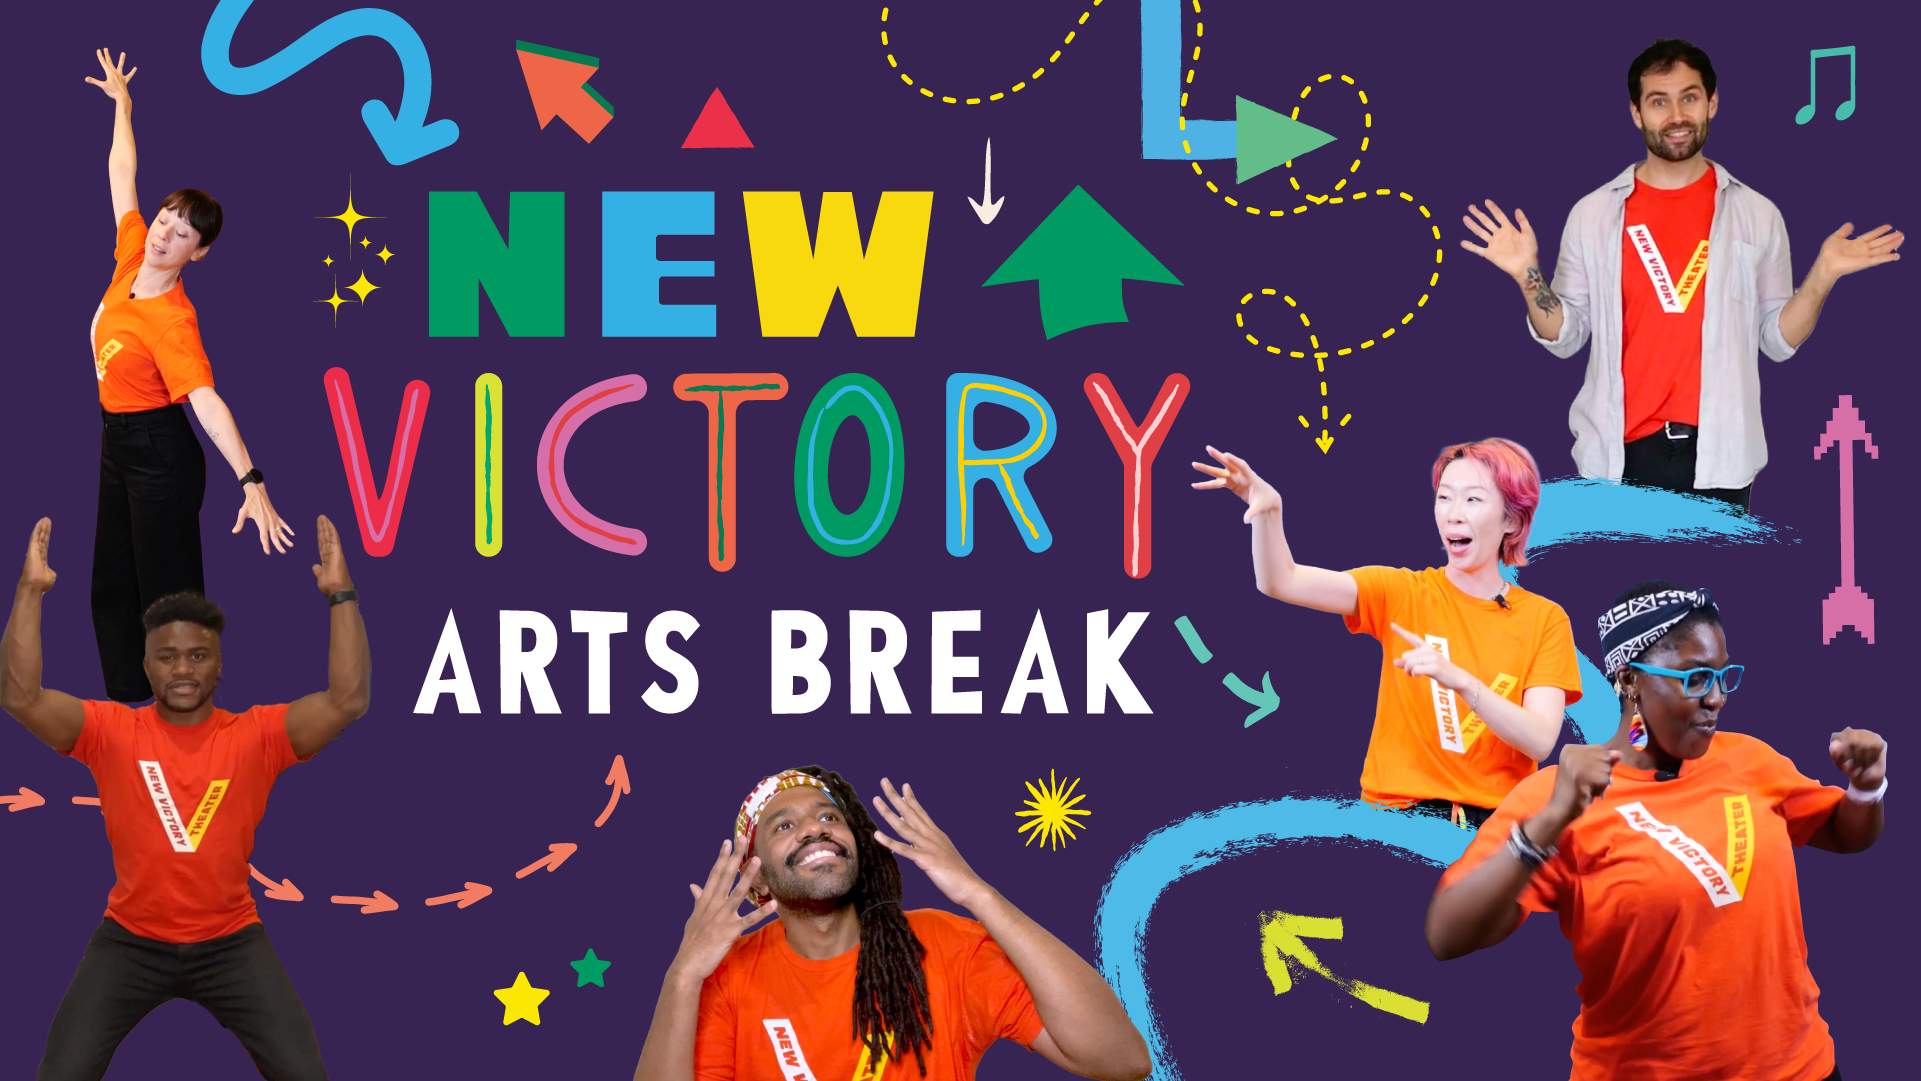 Colorful arrows and cutout photos of six Teaching Artists in orange New Victory t-shirts surround colorful illustrated text reading "New Victory Arts Break"